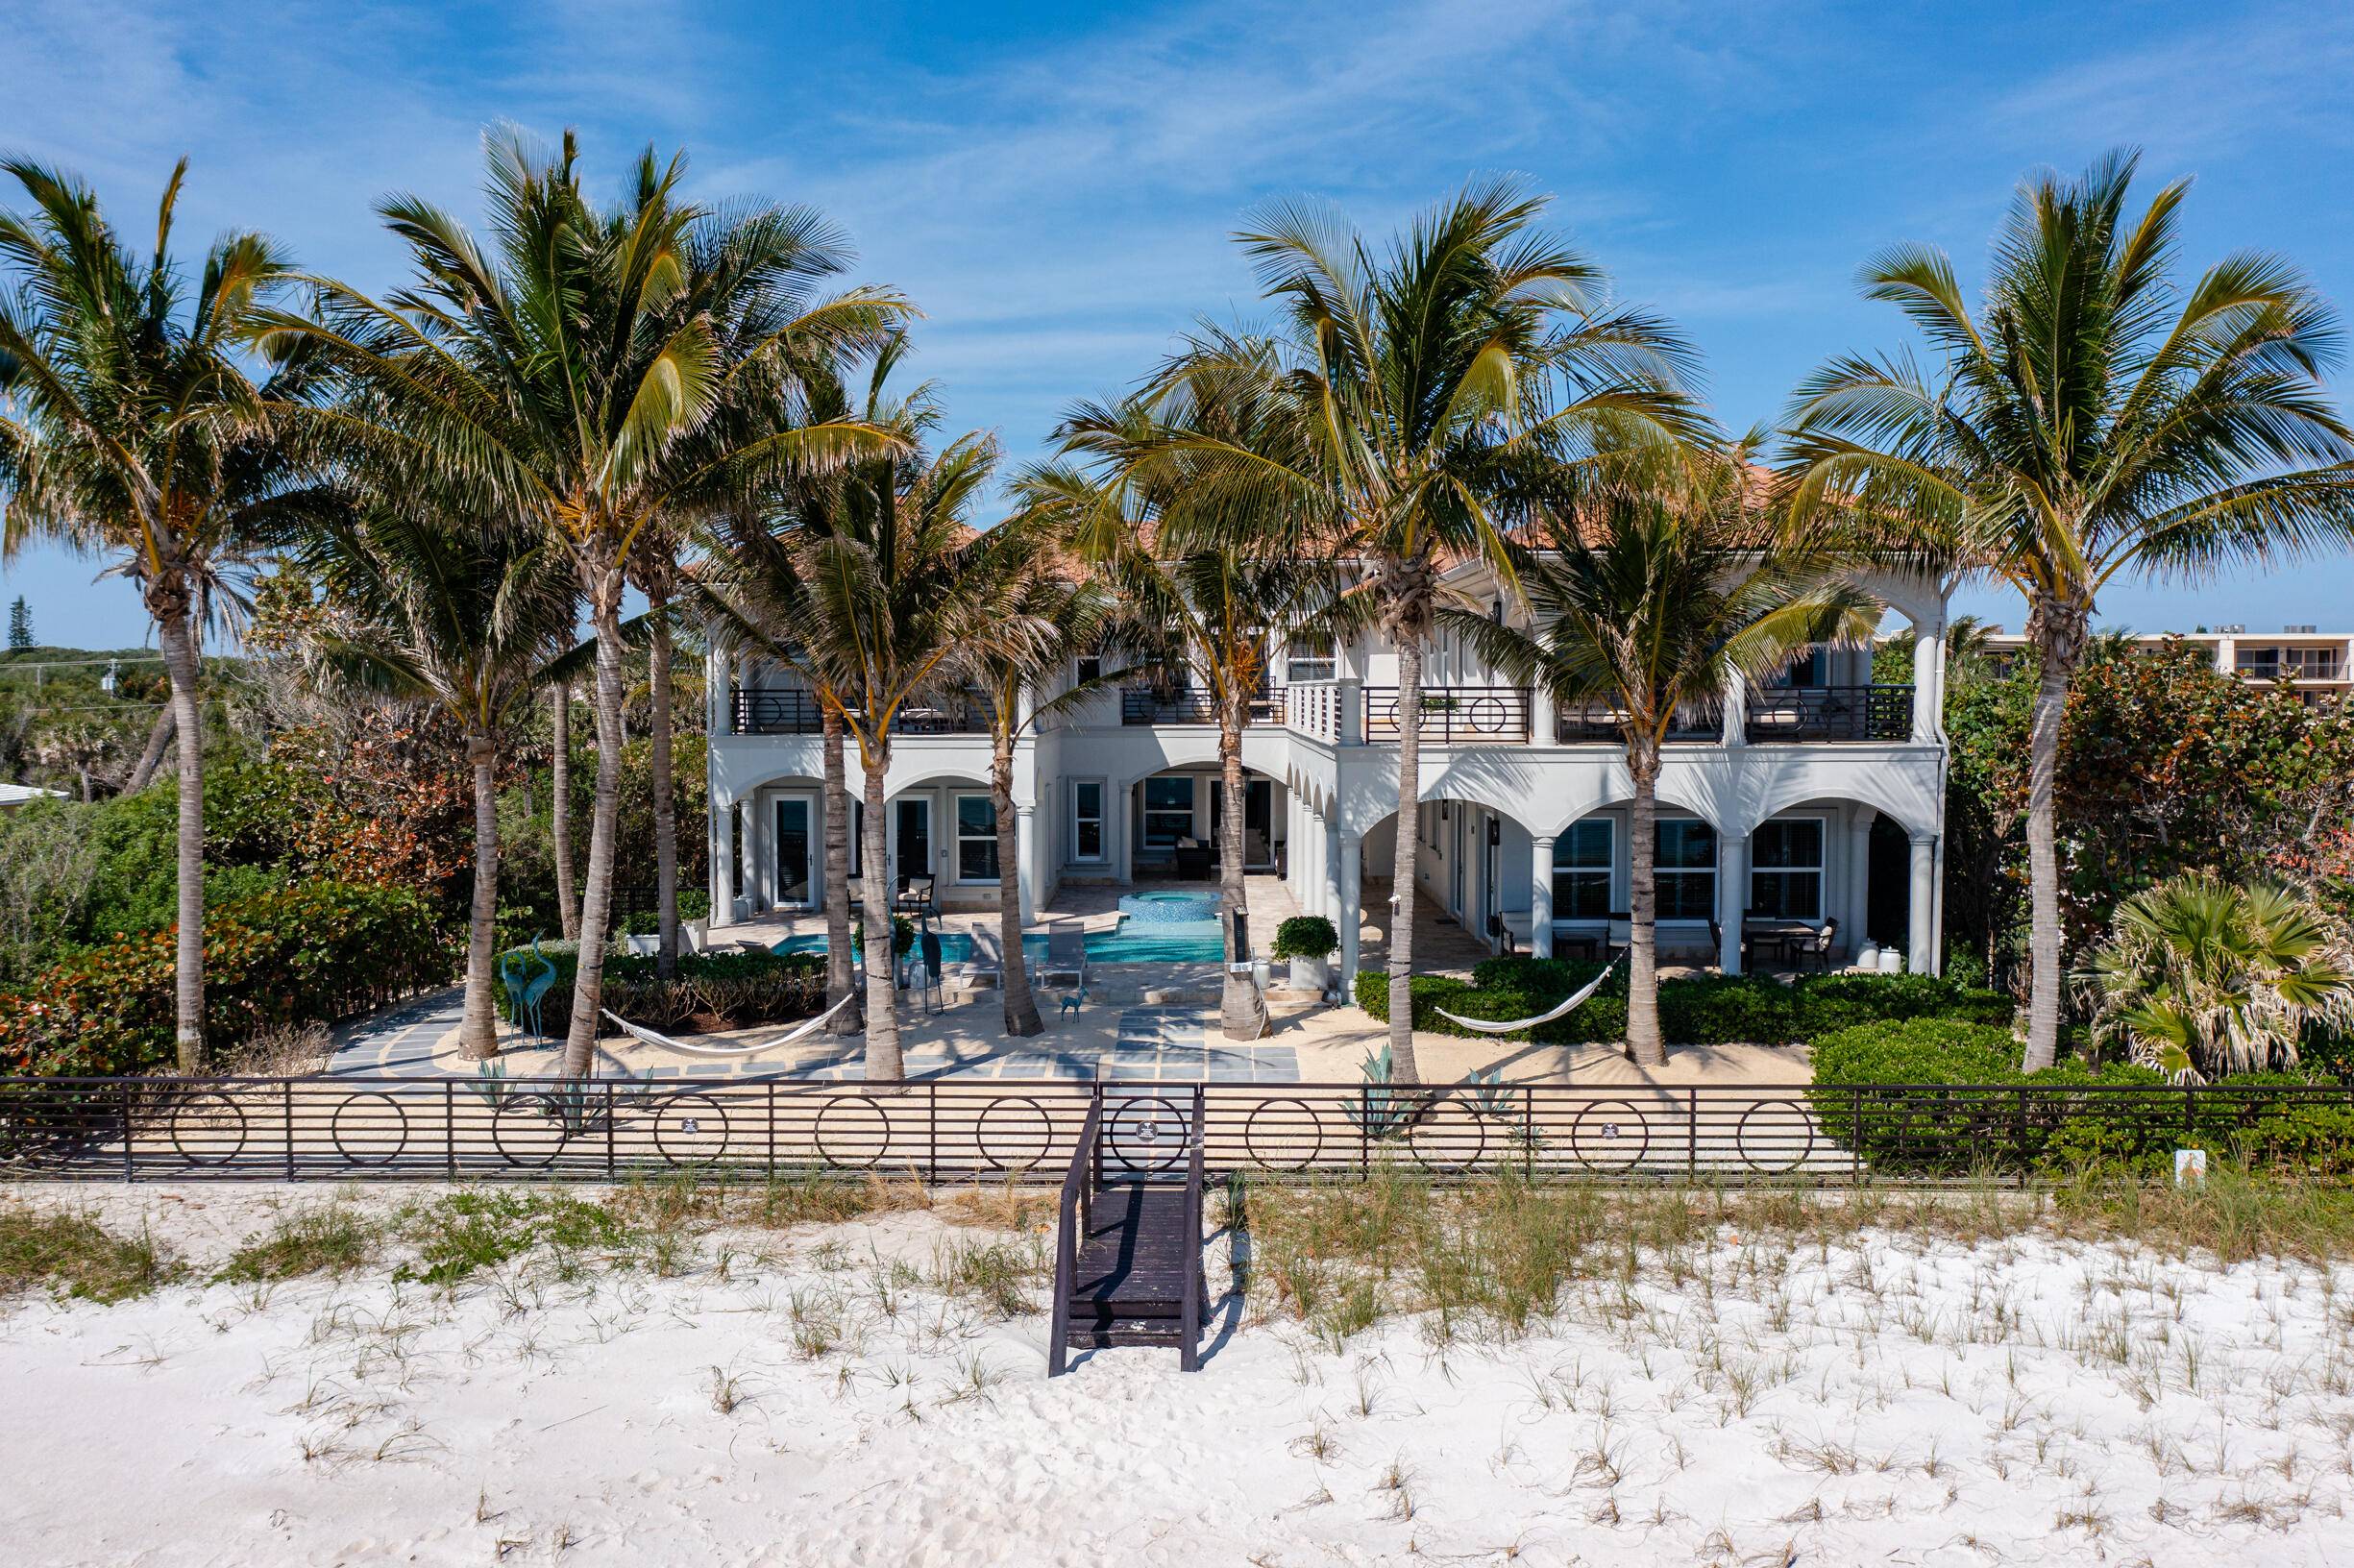 Showcasing panoramic ocean views in one of Vero's most desirable locations.